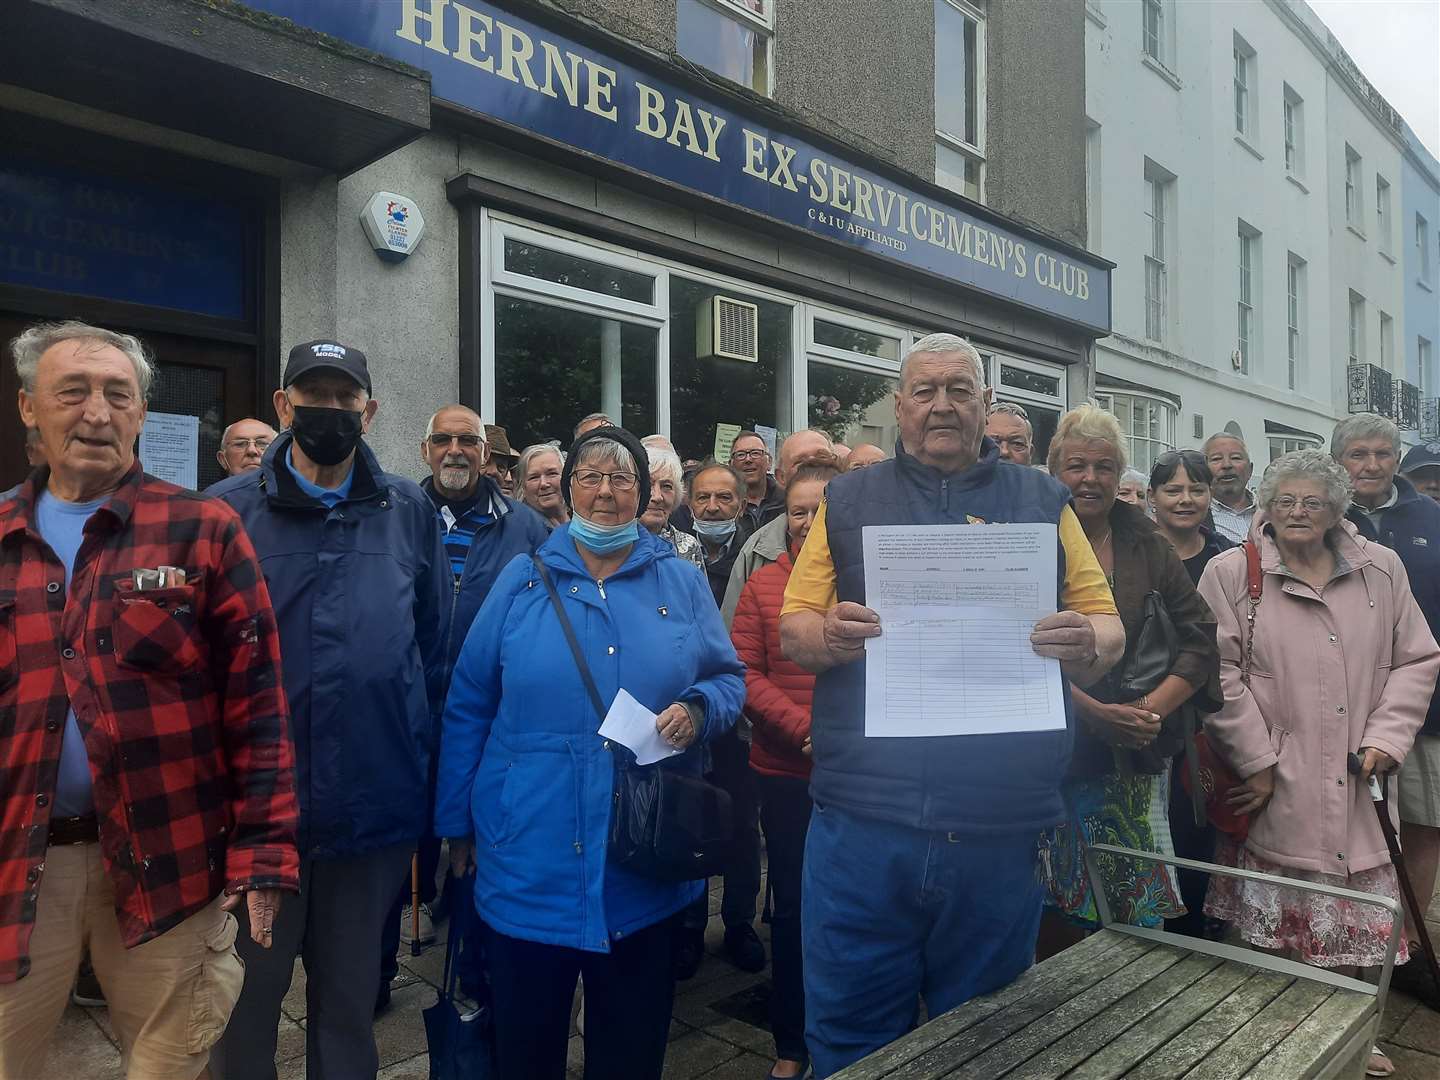 Members launched a campaign to save the Ex-Servicemen's Club in Herne Bay this summer, after bosses revealed it could close